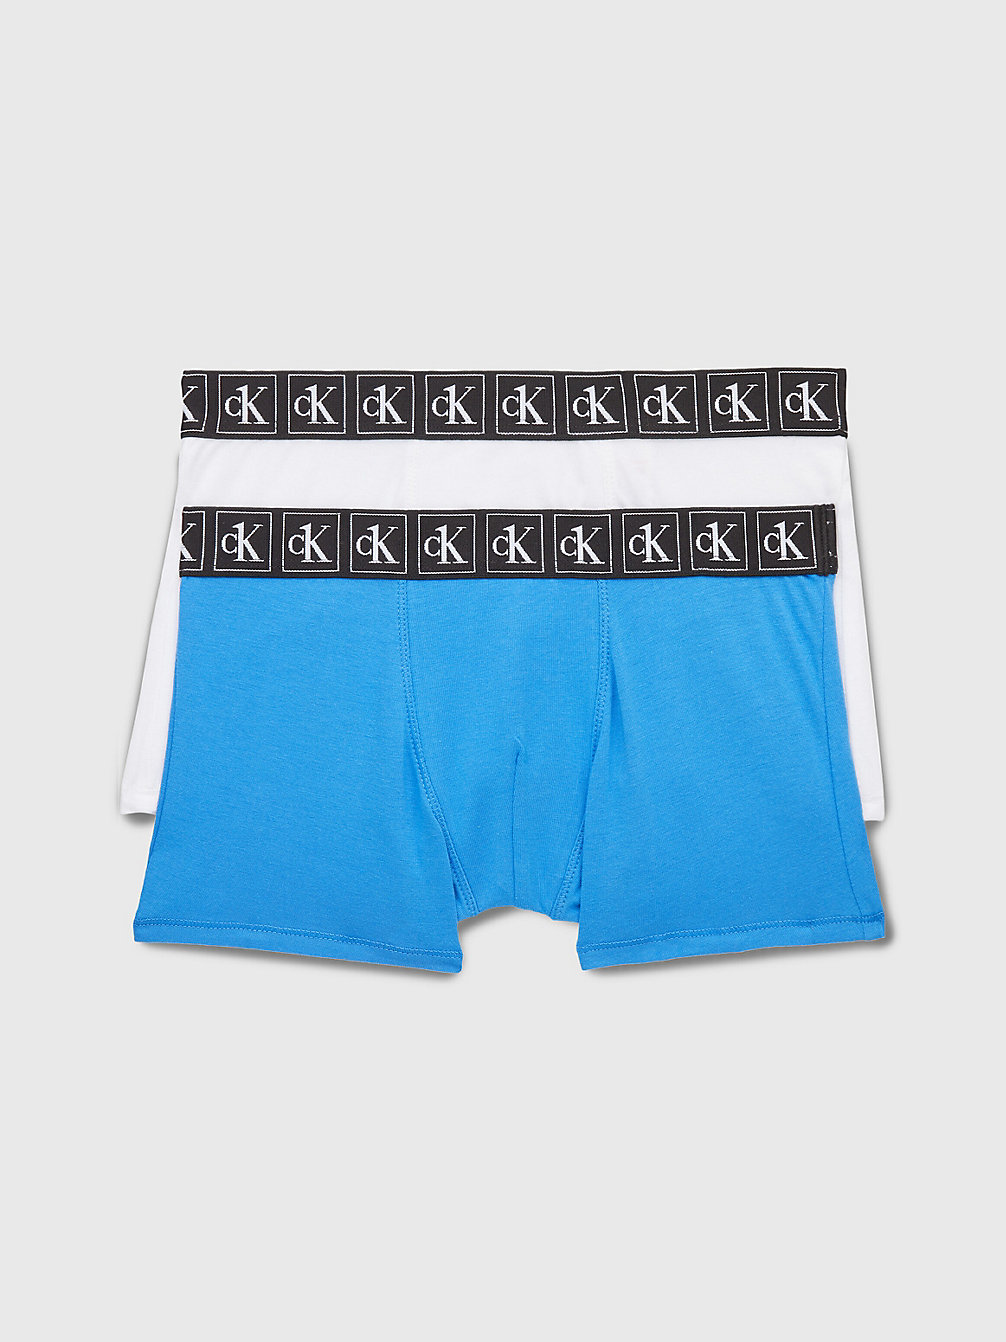 ELECTRICAQUA/PVHWHITE 2 Pack Boys Trunks - CK One undefined boys Calvin Klein